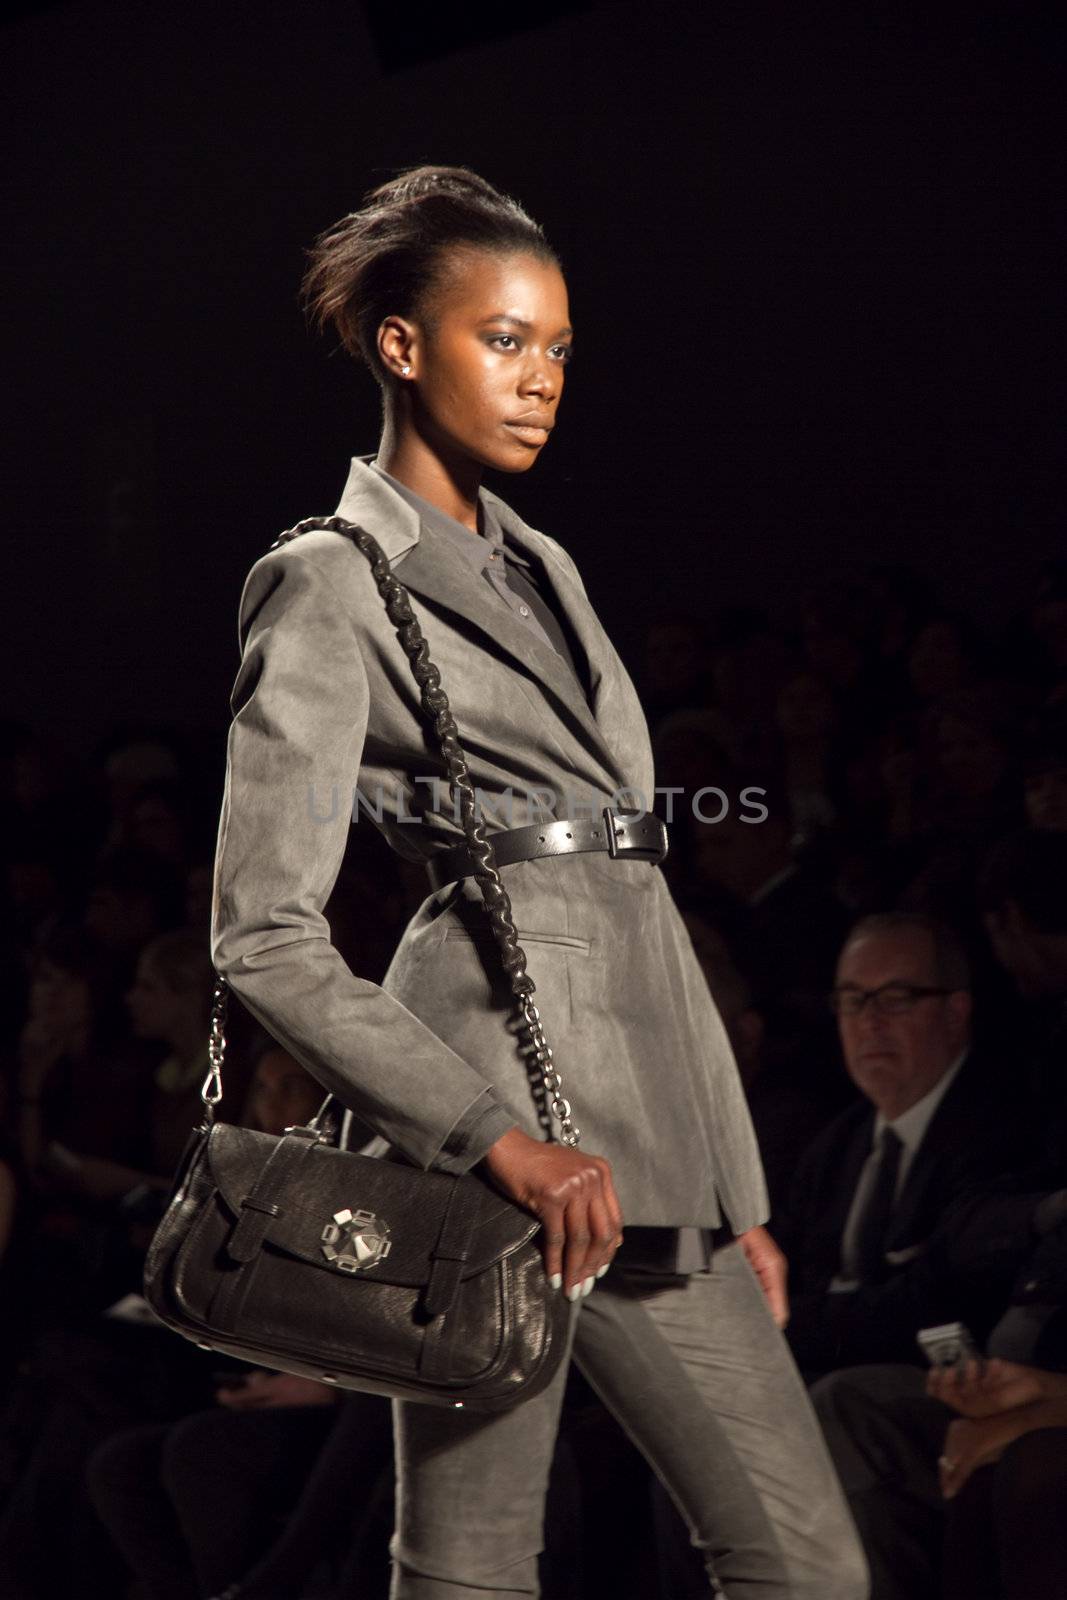 NEW-YORK, NY - FEBRUARY 11: A model walks the runway during the Nicole Miller Ready to Wear Fall/Winter 2011/2012 show at Mercedes-Benz New York Fashion Week on February 11, 2011 in New York, New York. (Photo by Diana Beato)